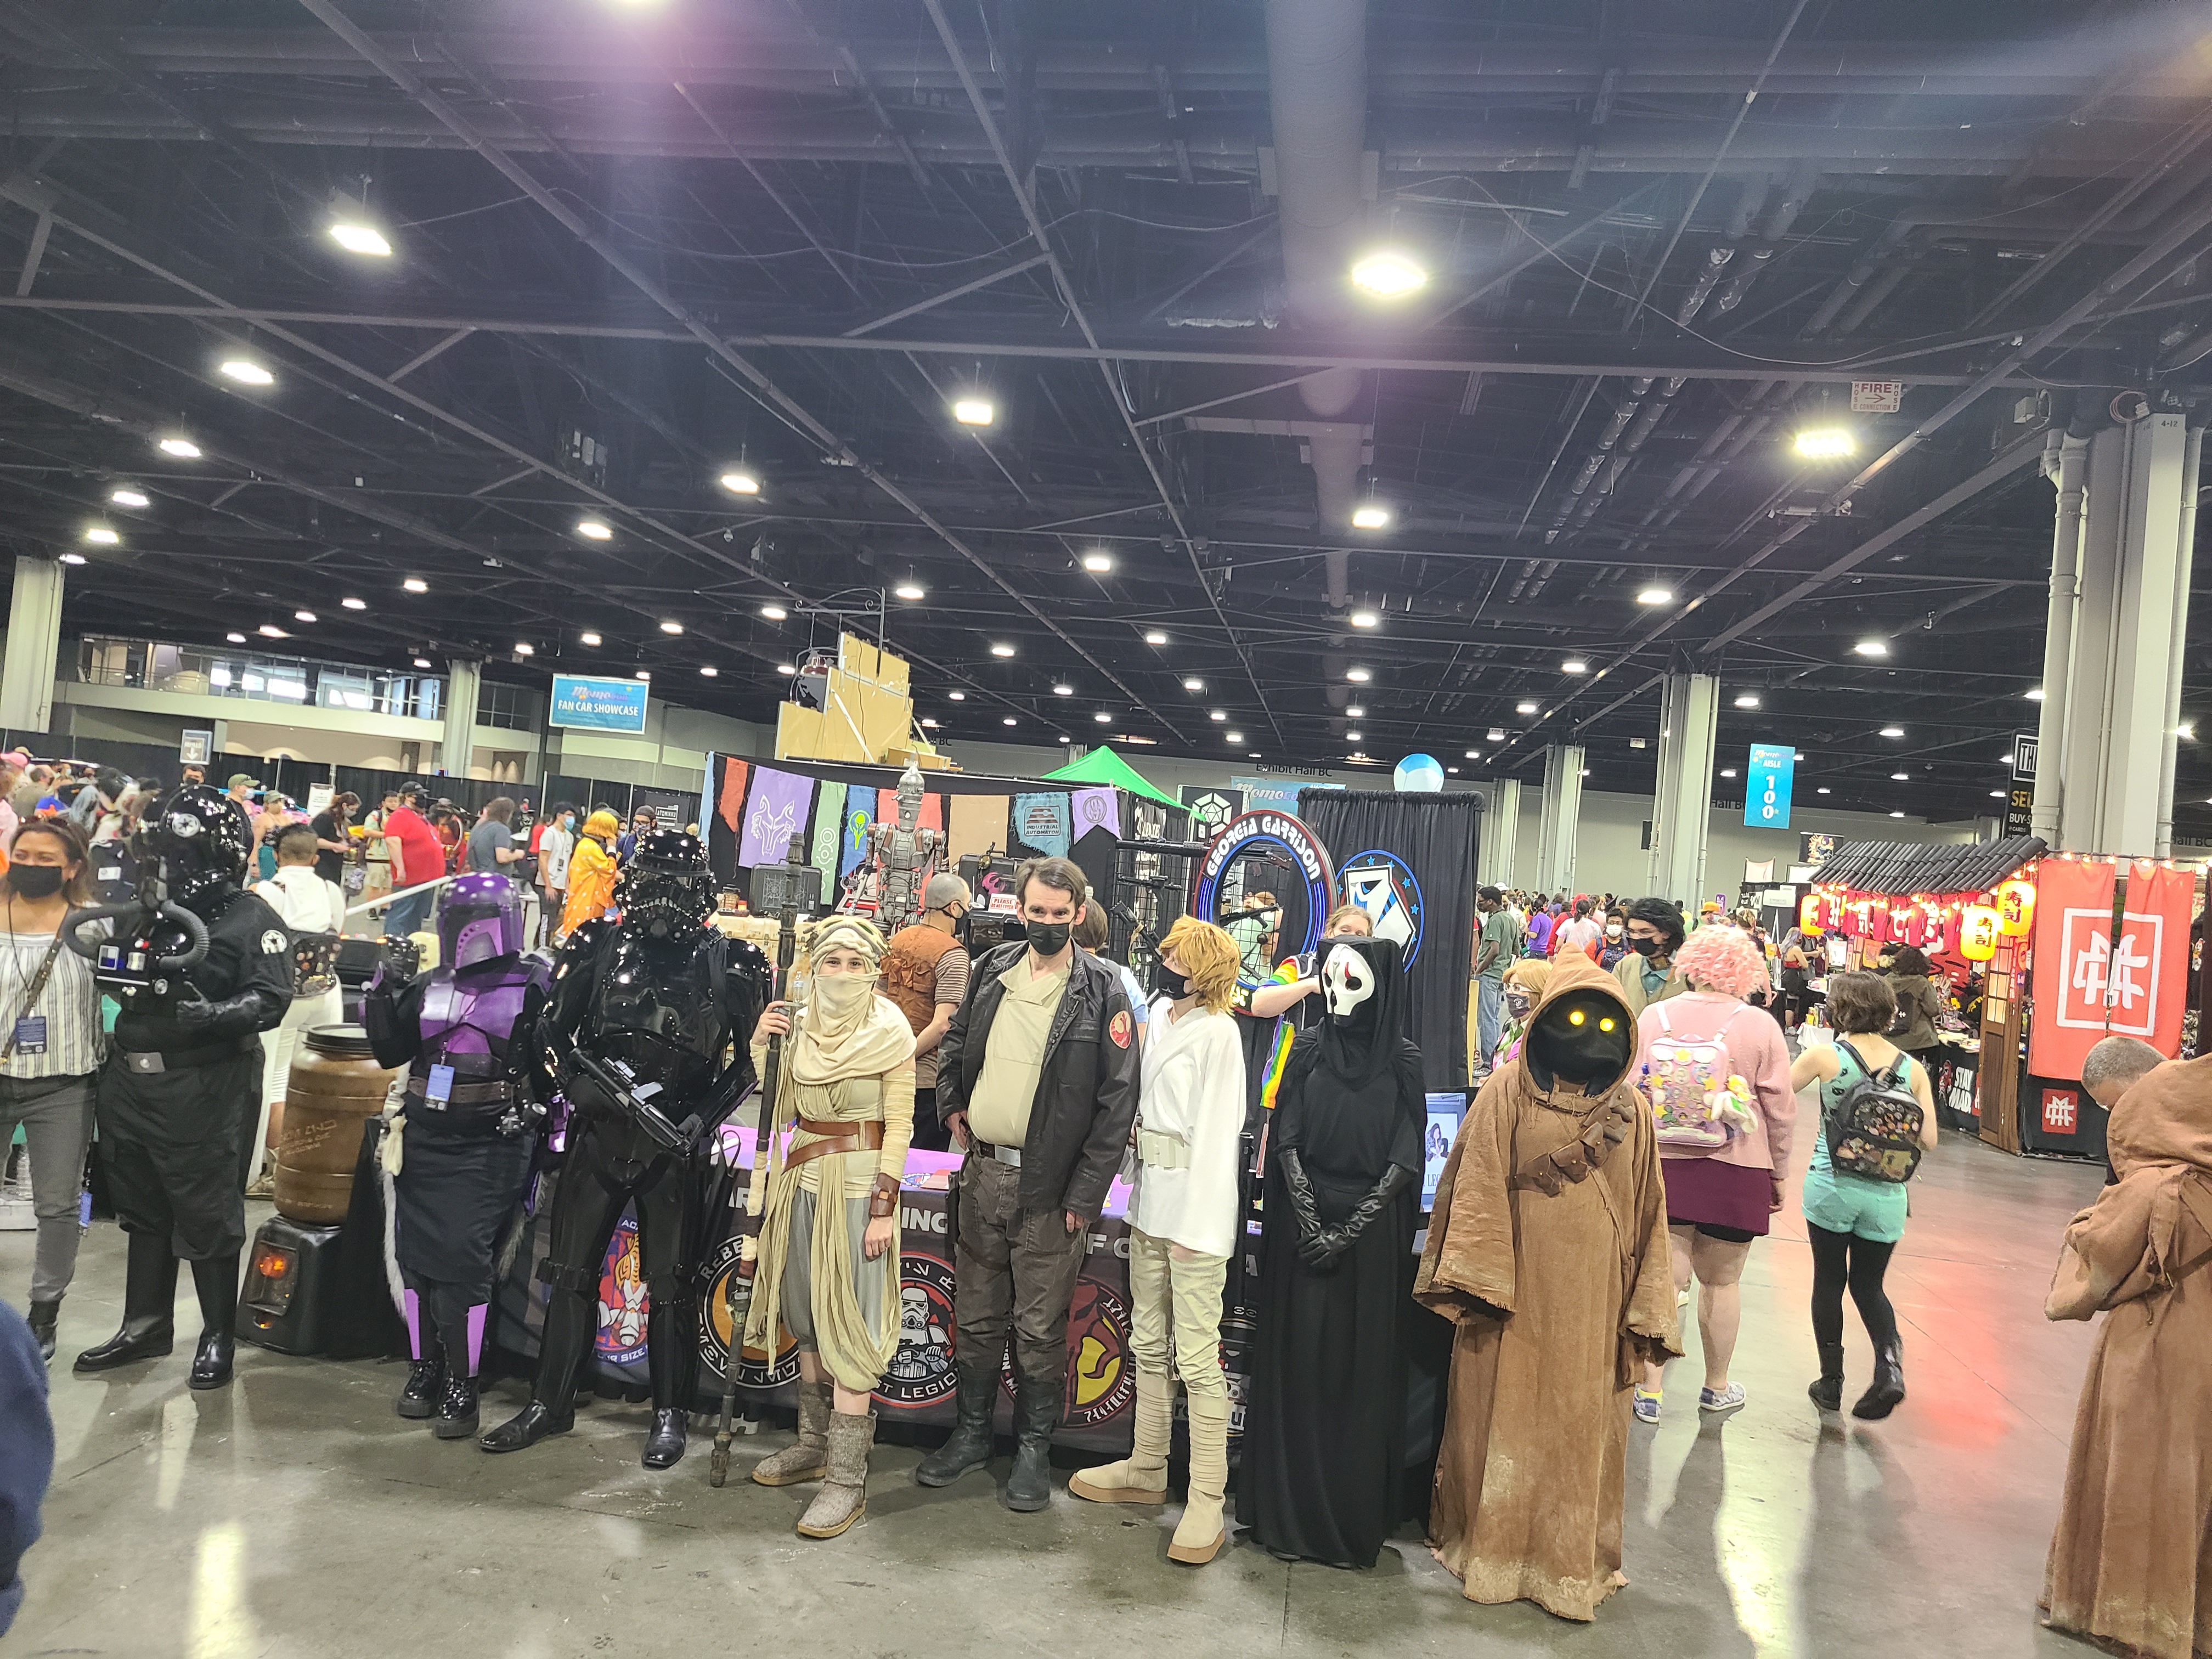 Lots of Star Wars cosplayers from the Atlanta Star Wars cosplay association